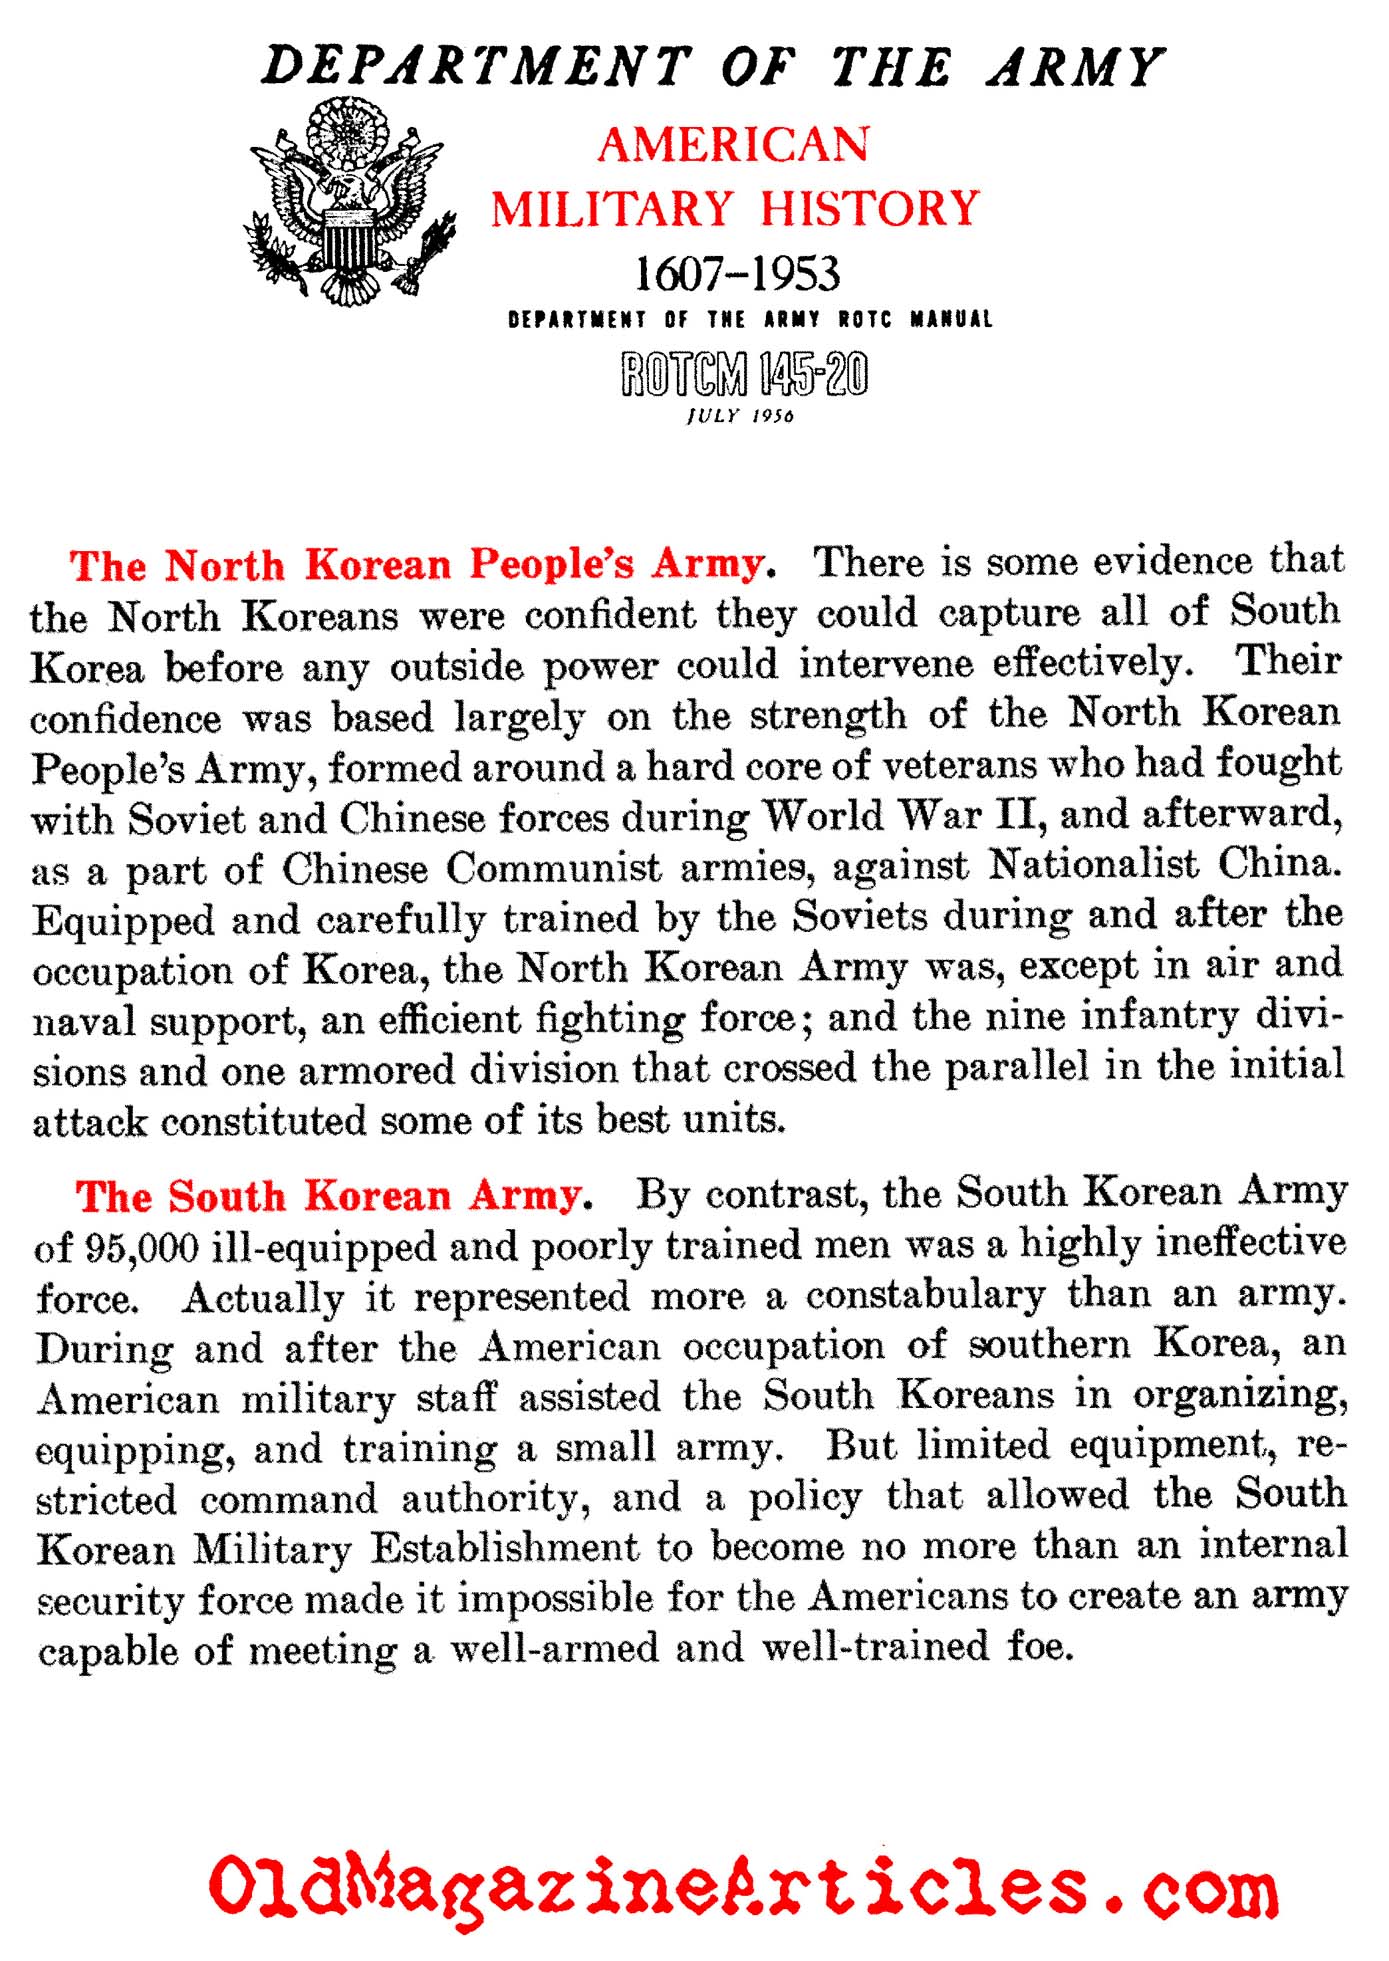 The Two Korean Armies Compared (Dept. of the Army, 1956)